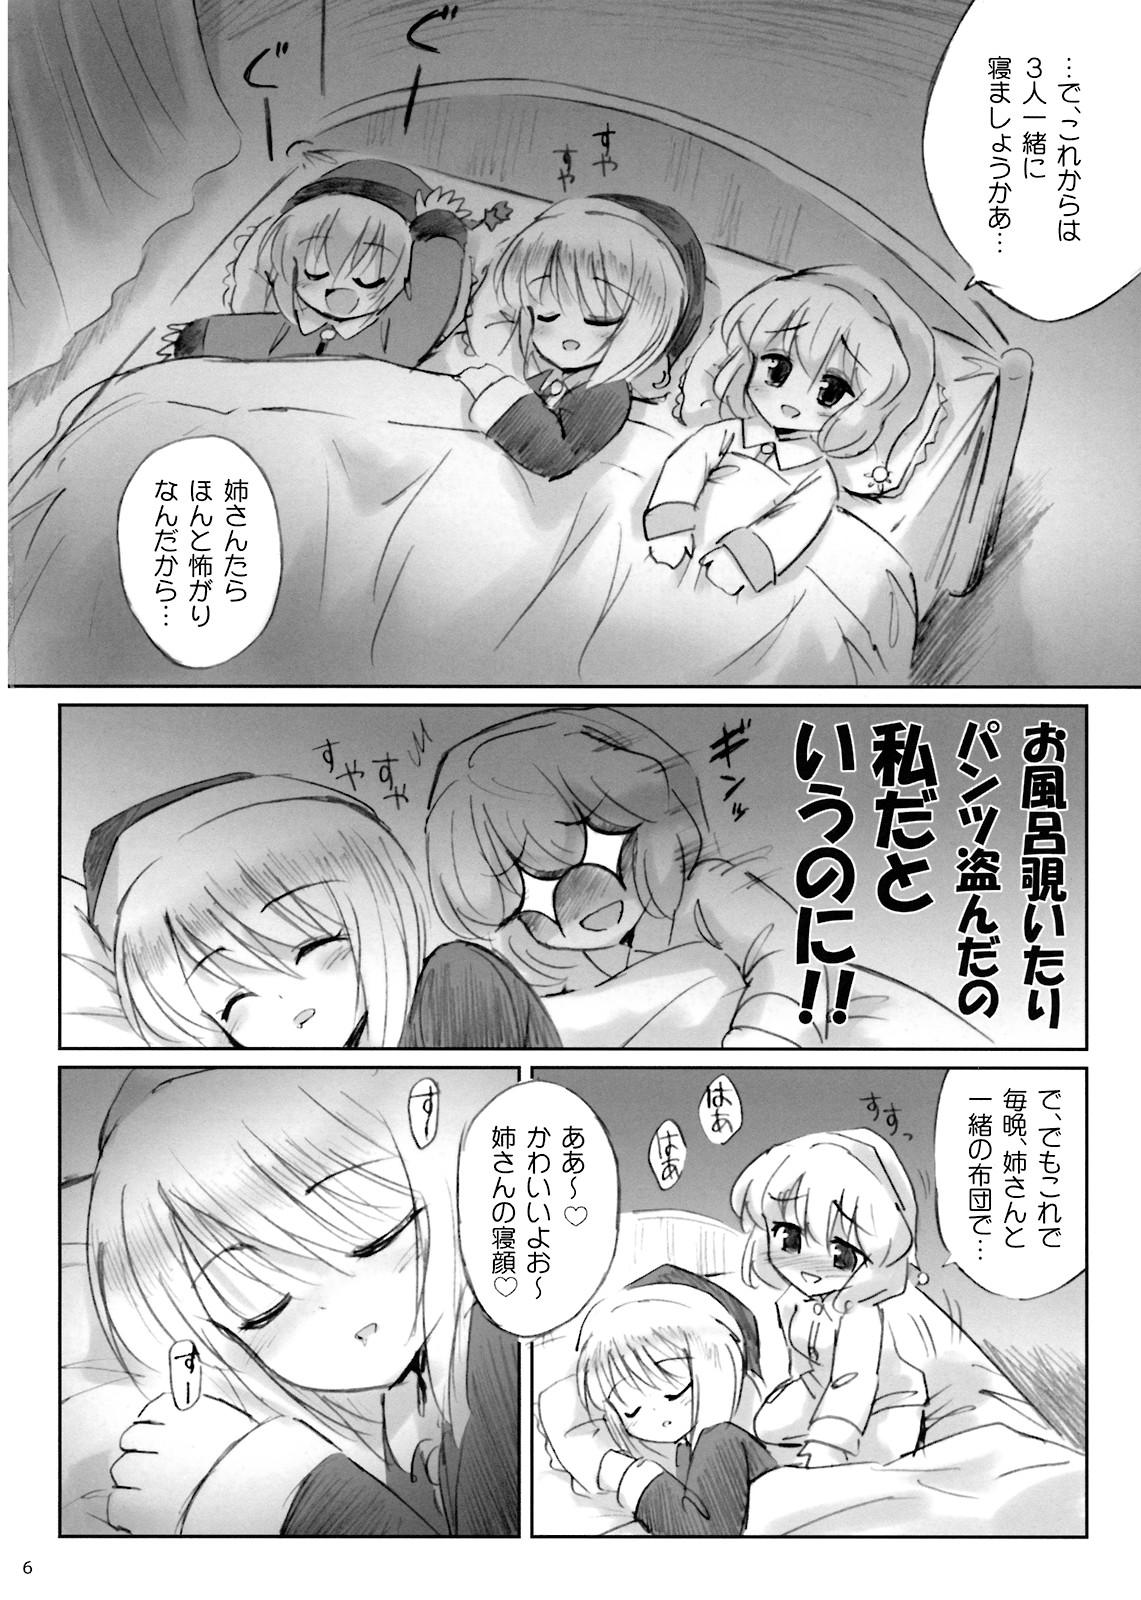 Humiliation Pov IDOLMASTER - Touhou project Cum Inside - Page 5